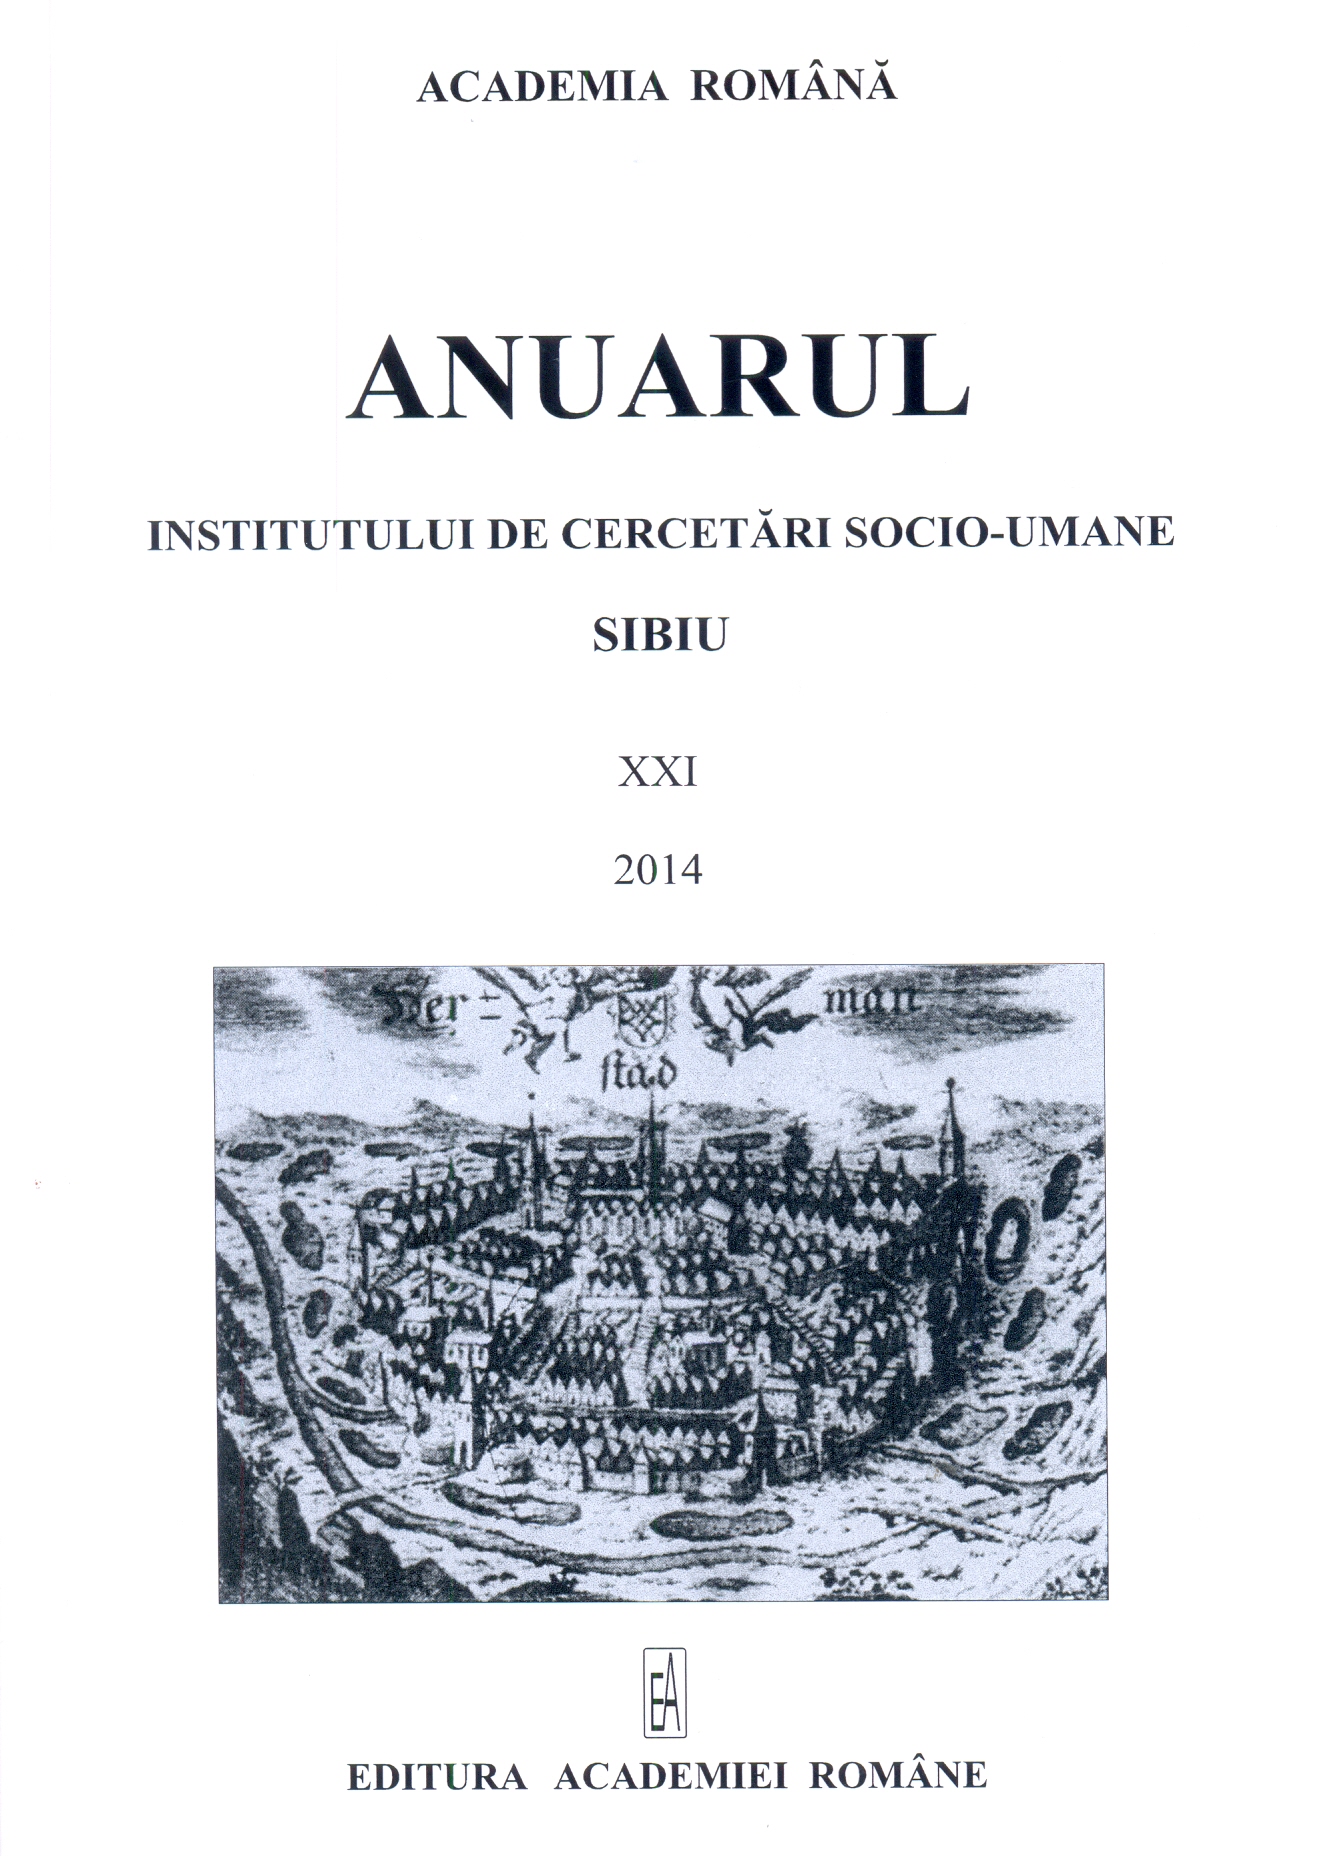 Undiscovered Letters from Aurel Cioran’s Archives Cover Image